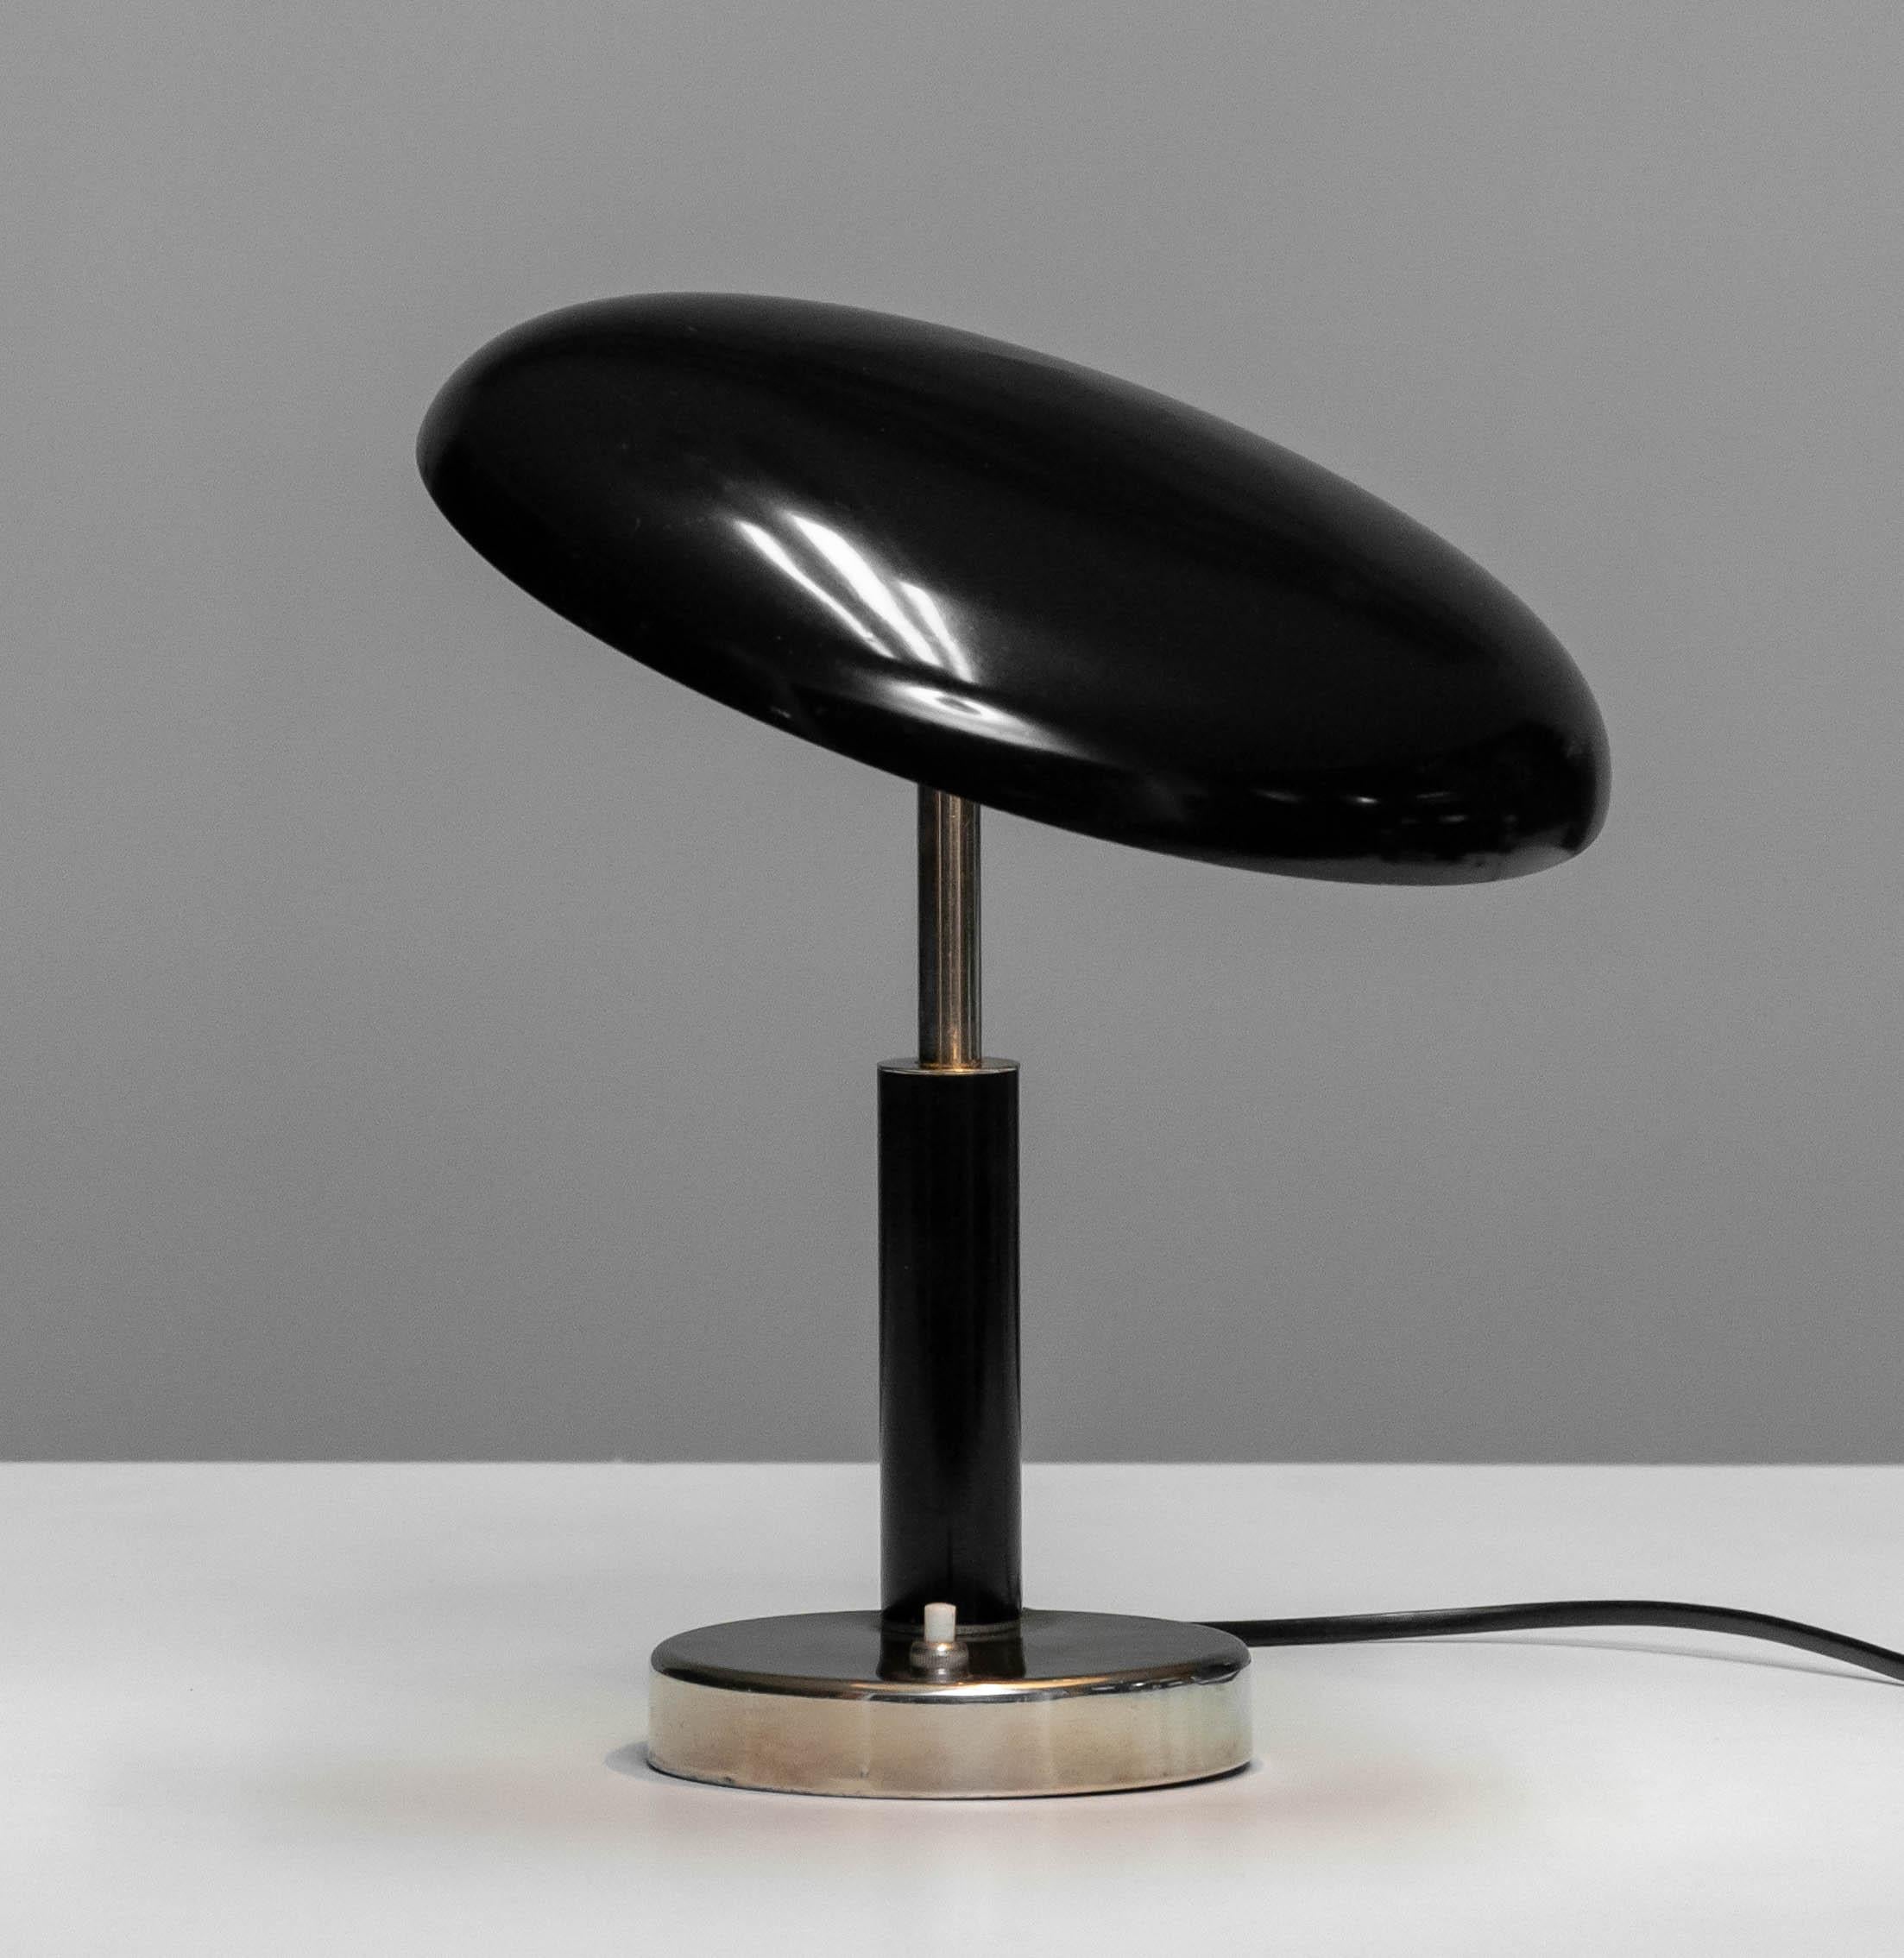 1930s Chrome Art Deco Table / Desk Lamp with Fixed Tilted Black Lacquered Shade  In Good Condition For Sale In Silvolde, Gelderland